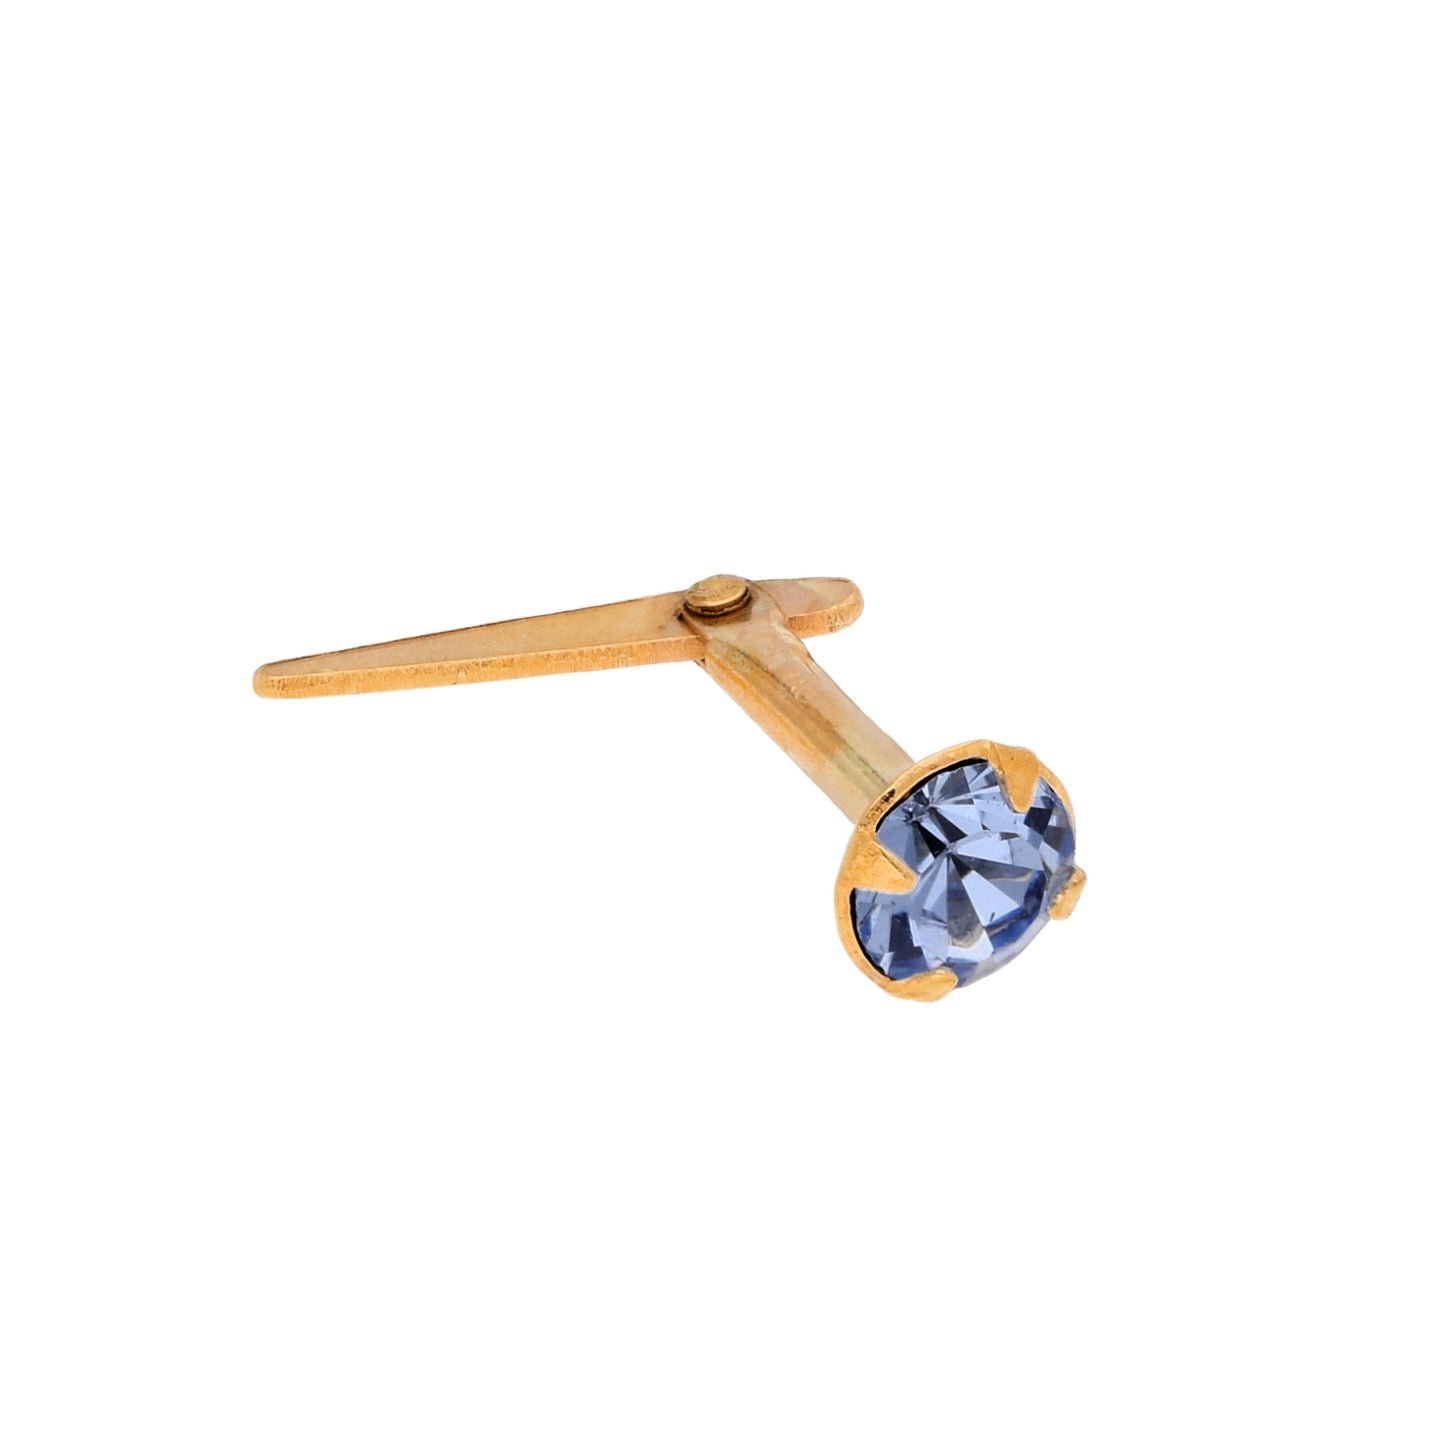 Andralok 9ct Yellow Gold CZ 3mm Nose Stud